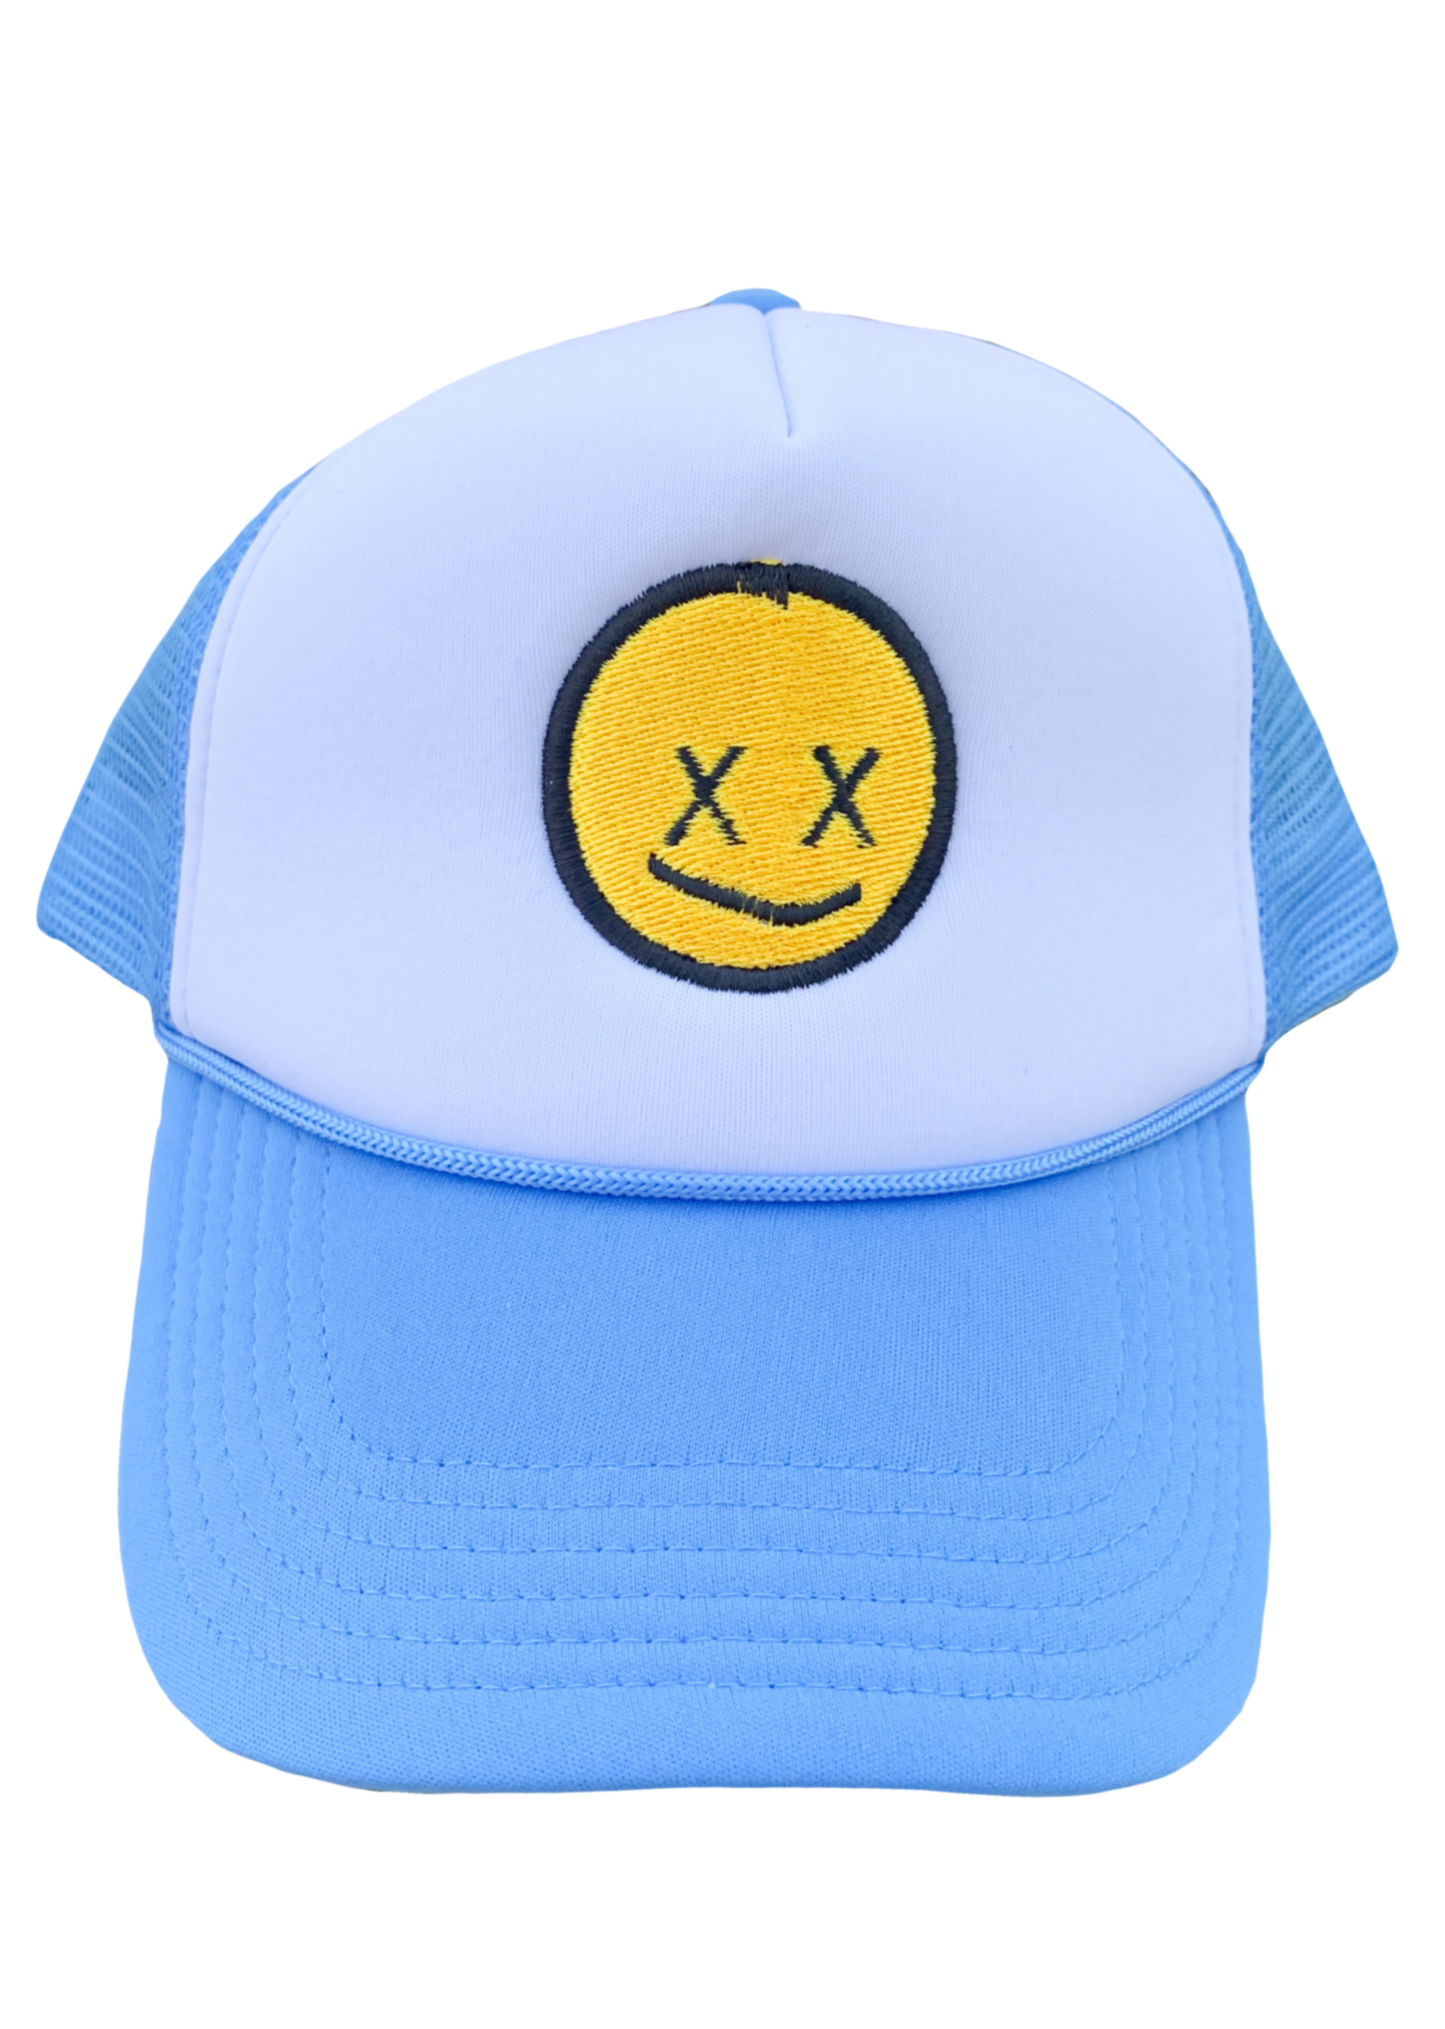 X'd Out Happy Face Embroidered Foam Trucker Hat